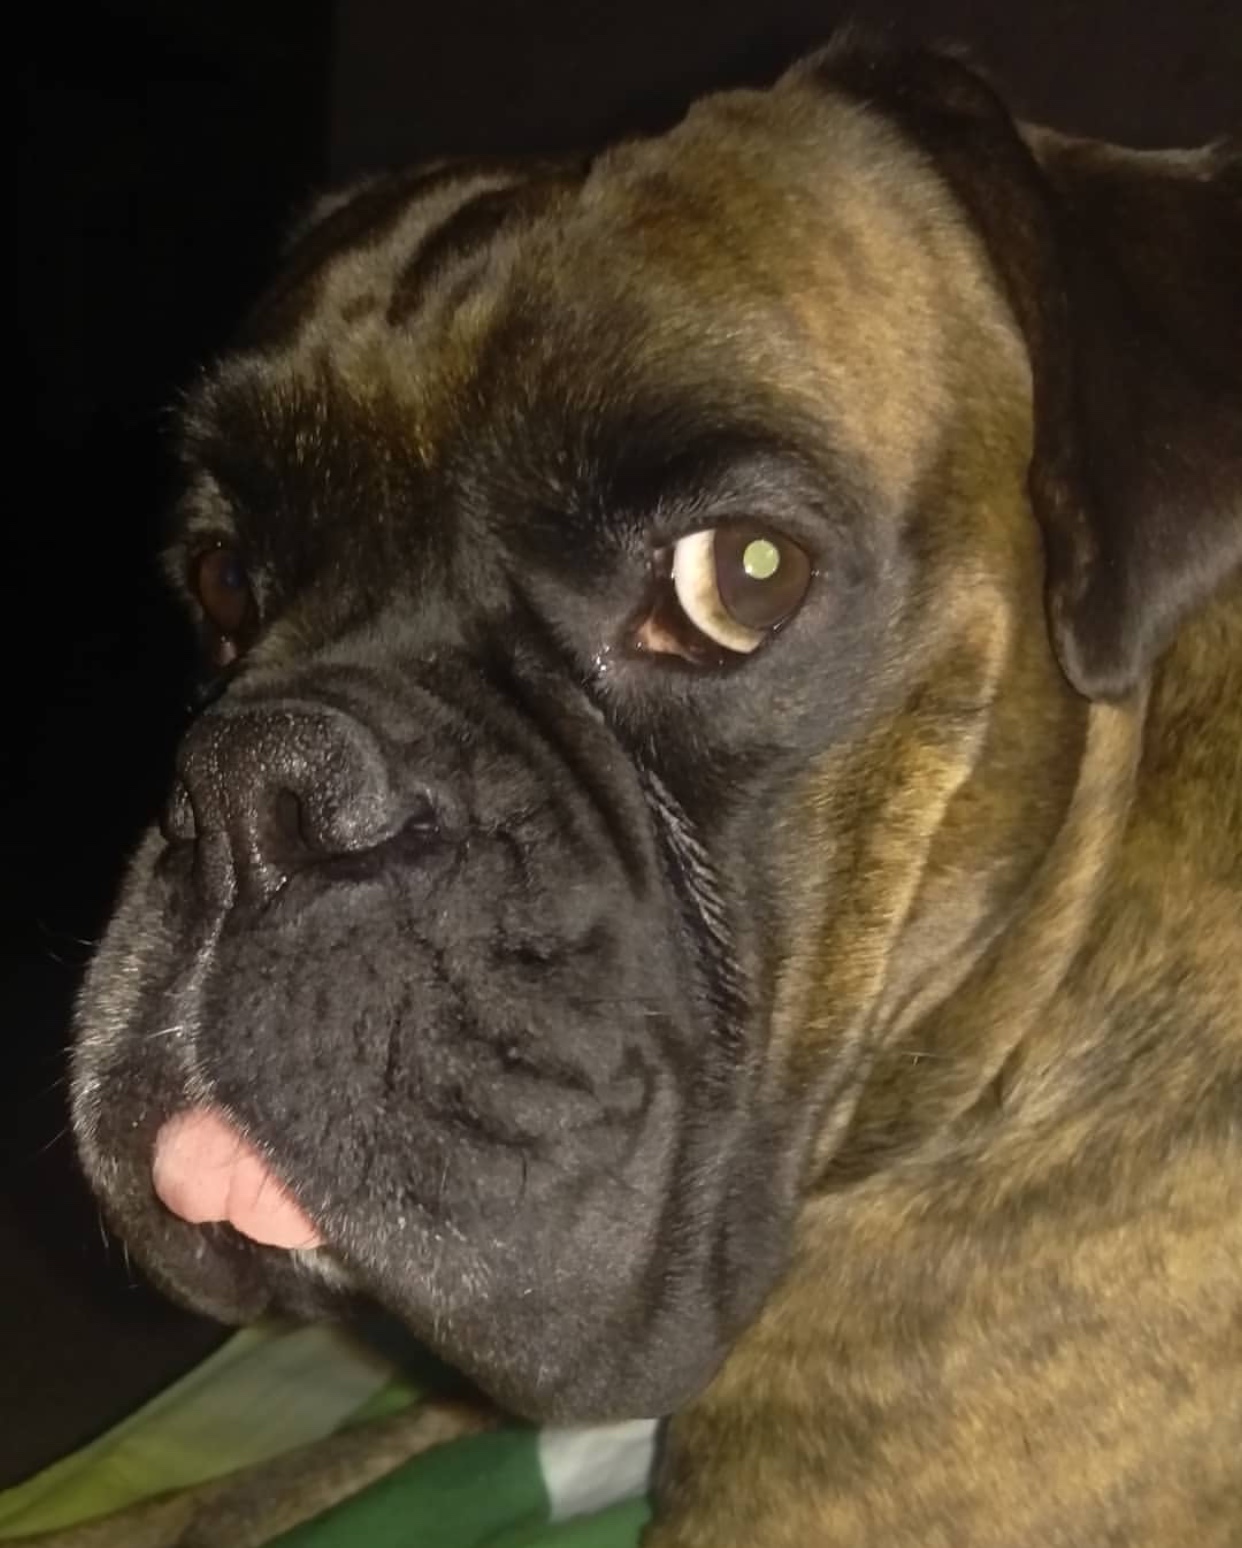 A boxer dog staring back with its serious face